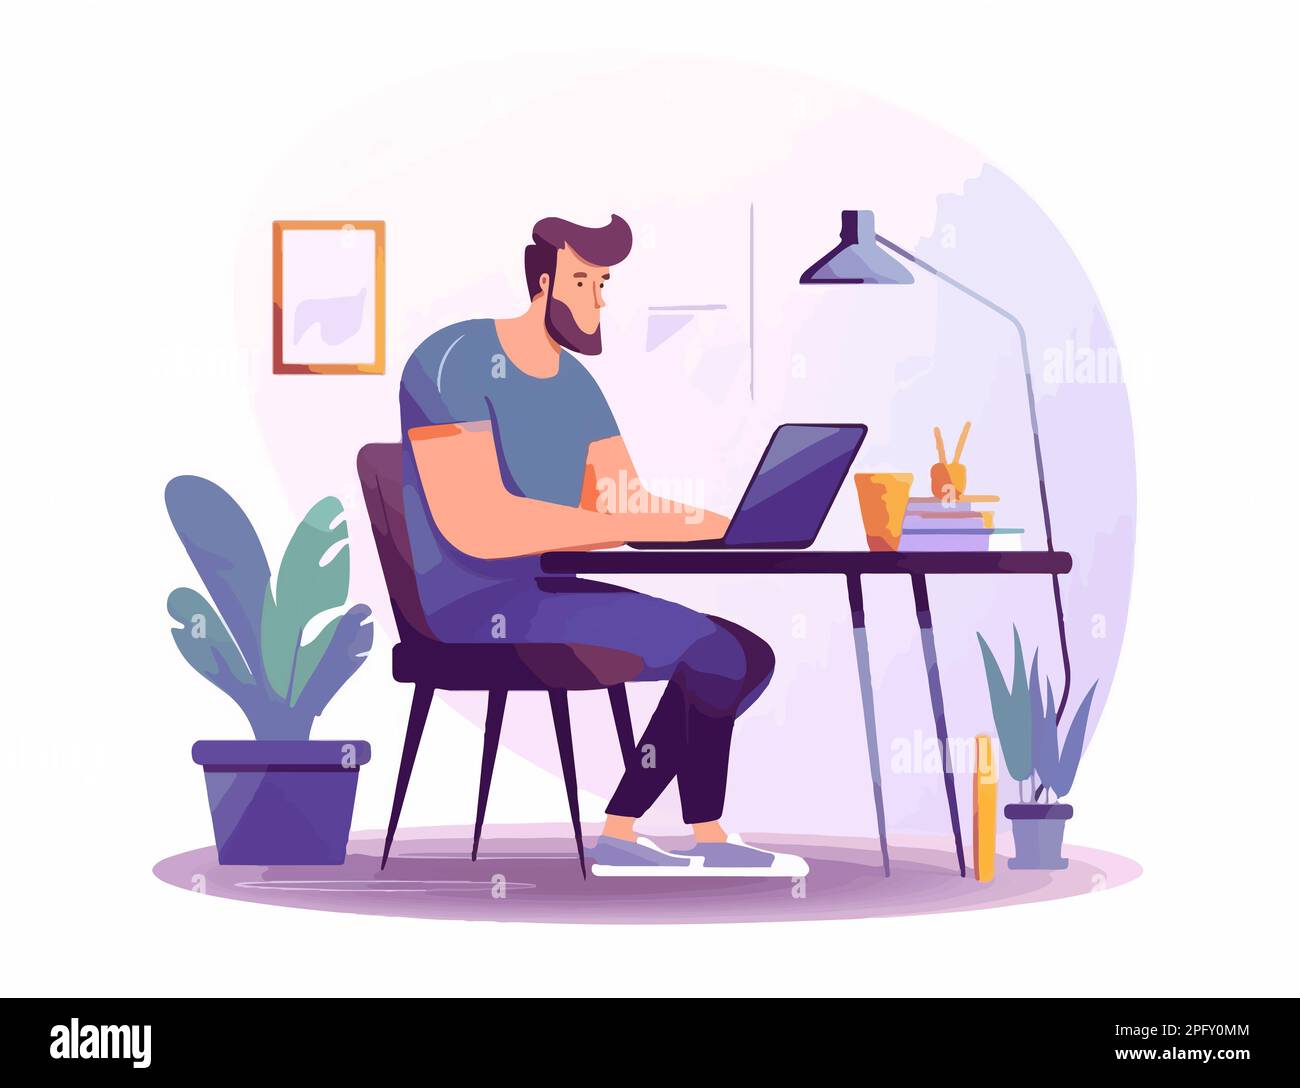 Working from Home WFH Concept Vector Illustration Stockfoto